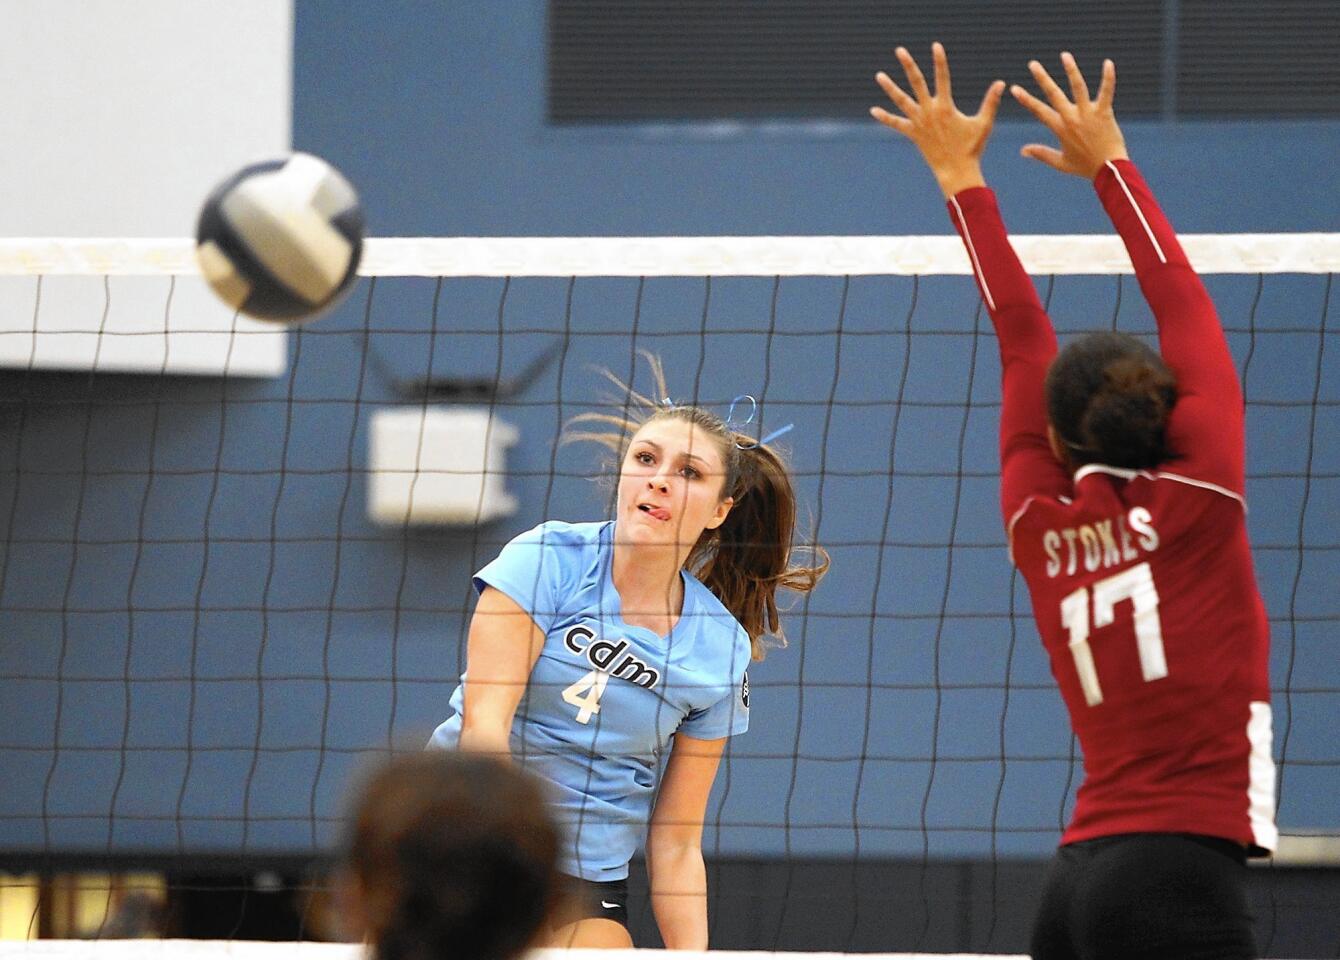 Jesse Harris led Corona del Mar High with 11 kills against Long Beach Wilson in the first round of the CIF Southern Section Division 1AA playoffs.